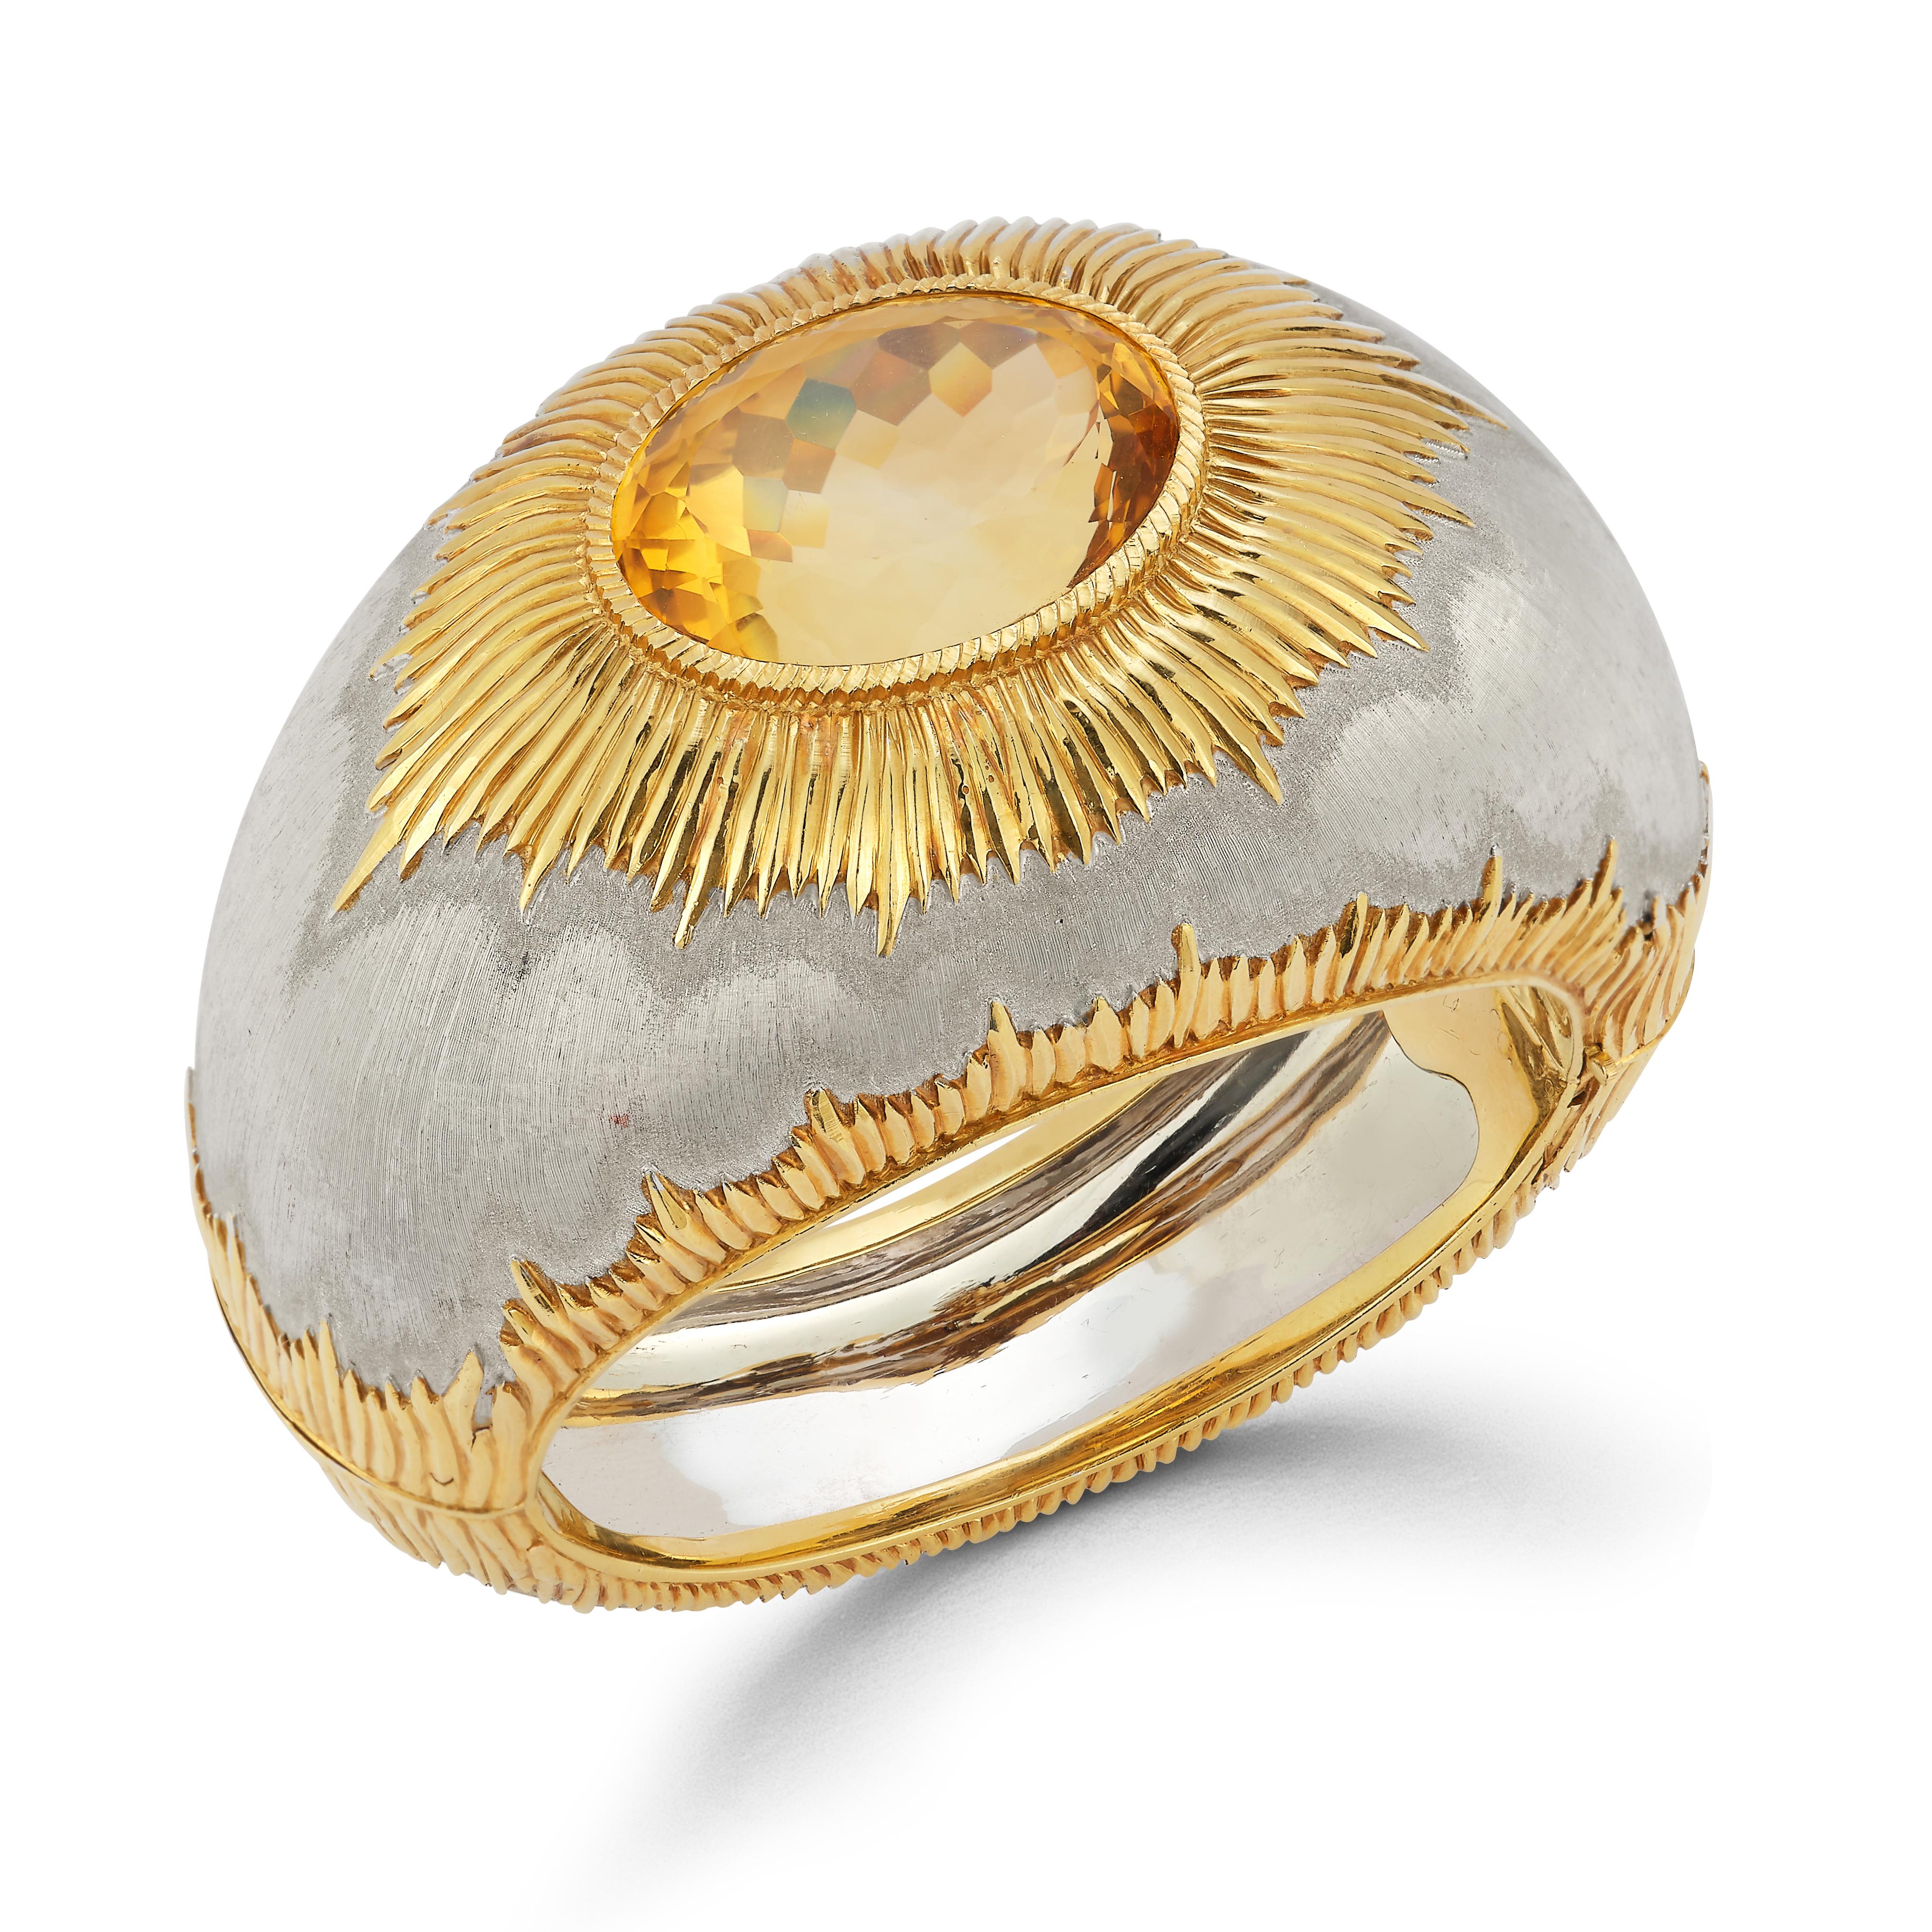 Buccellati Large Citrine Two Tone Gold Bangle Bracelet  

1 large oval cut citrine set in 18 karat white and yellow gold satin finish.

Citrine Weight: approximately 50.00 cts 

Measurements: 3